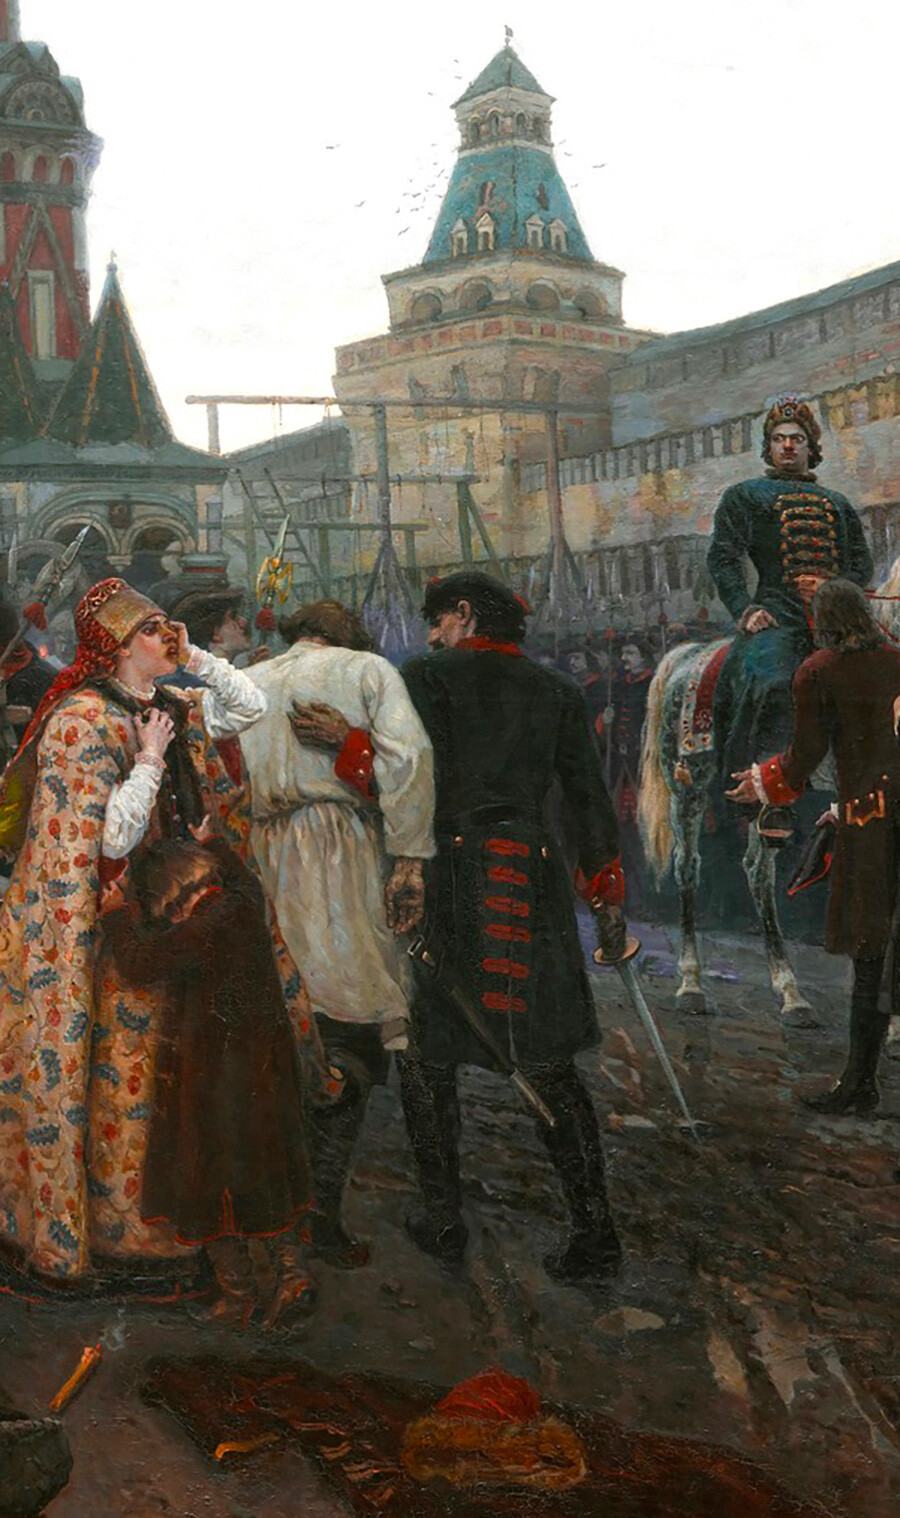 Vasily Surikov's painting “The Morning of the Streltsy Execution ...